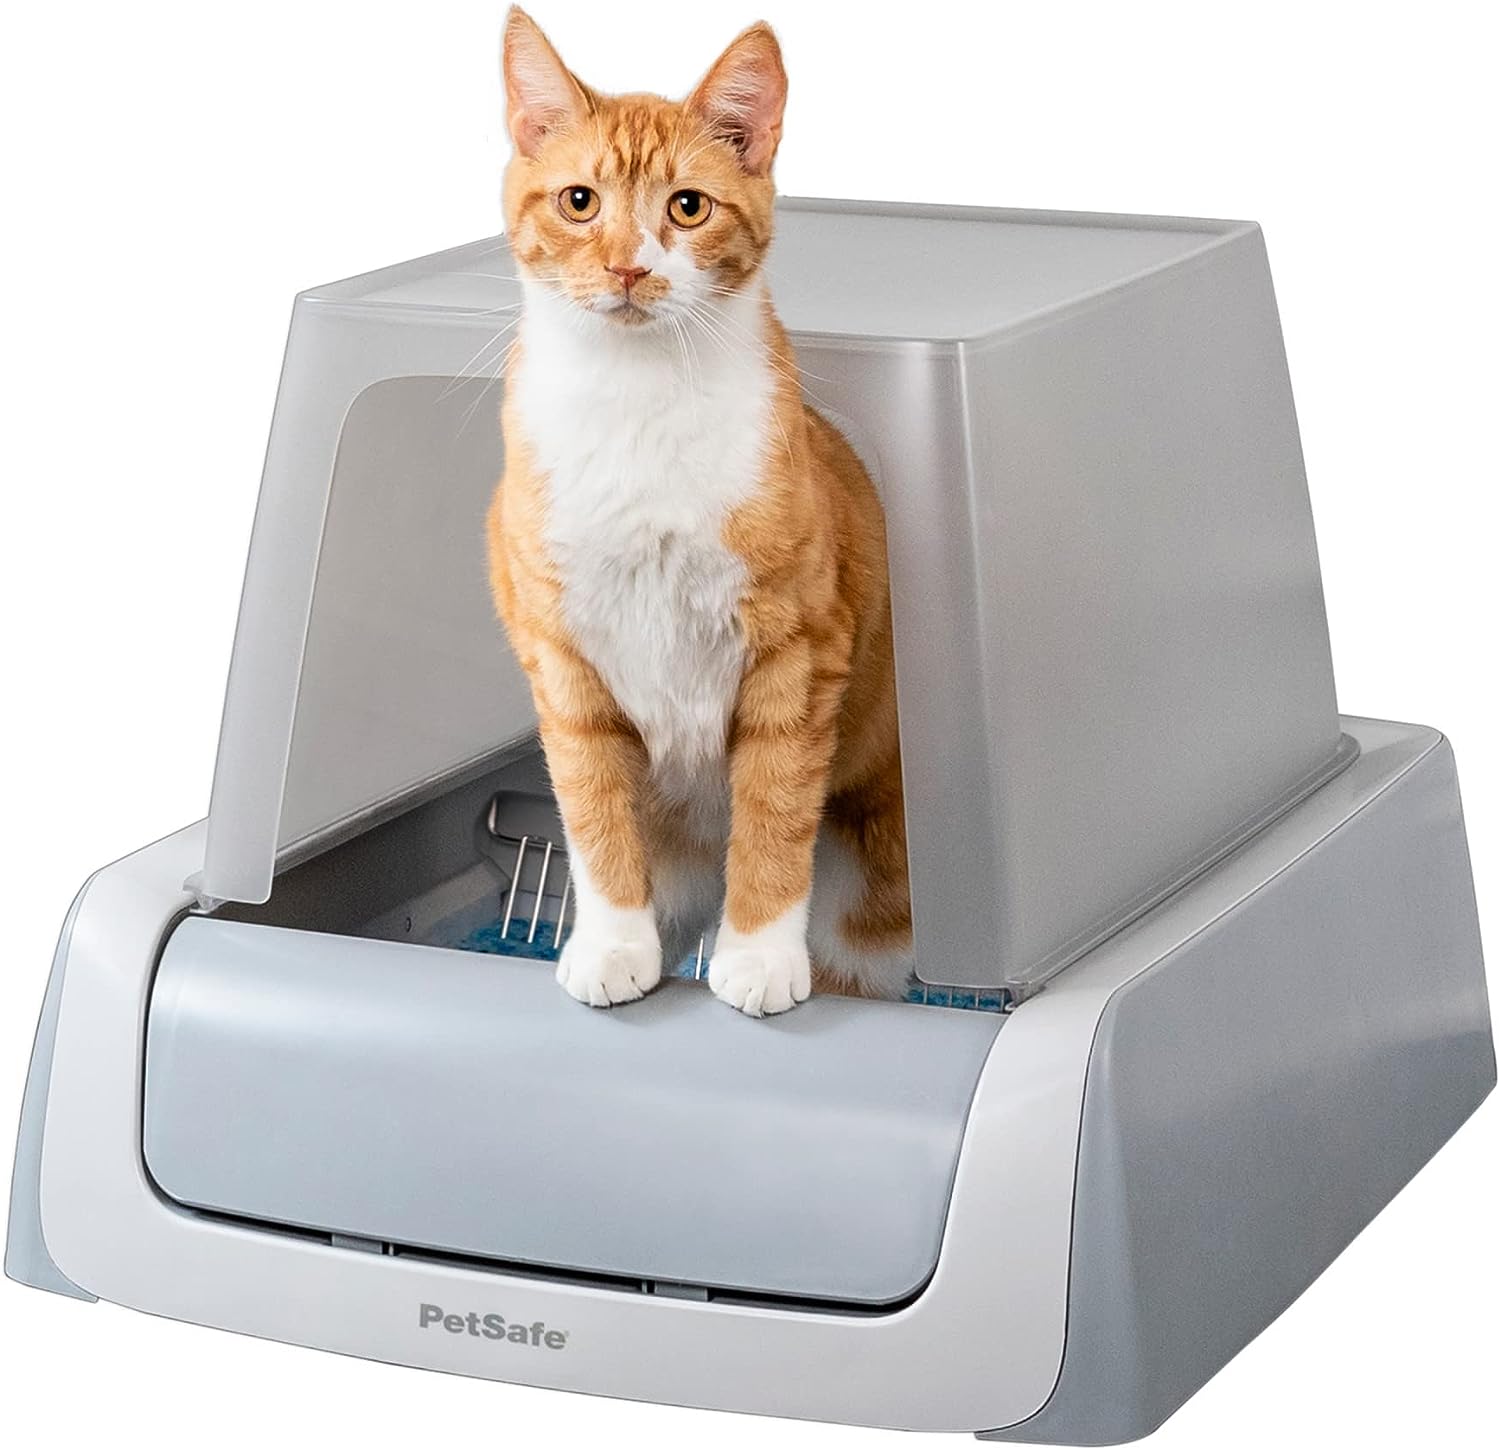 PetSafe ScoopFree Complete Plus Self-Cleaning Cat Litter Box Review